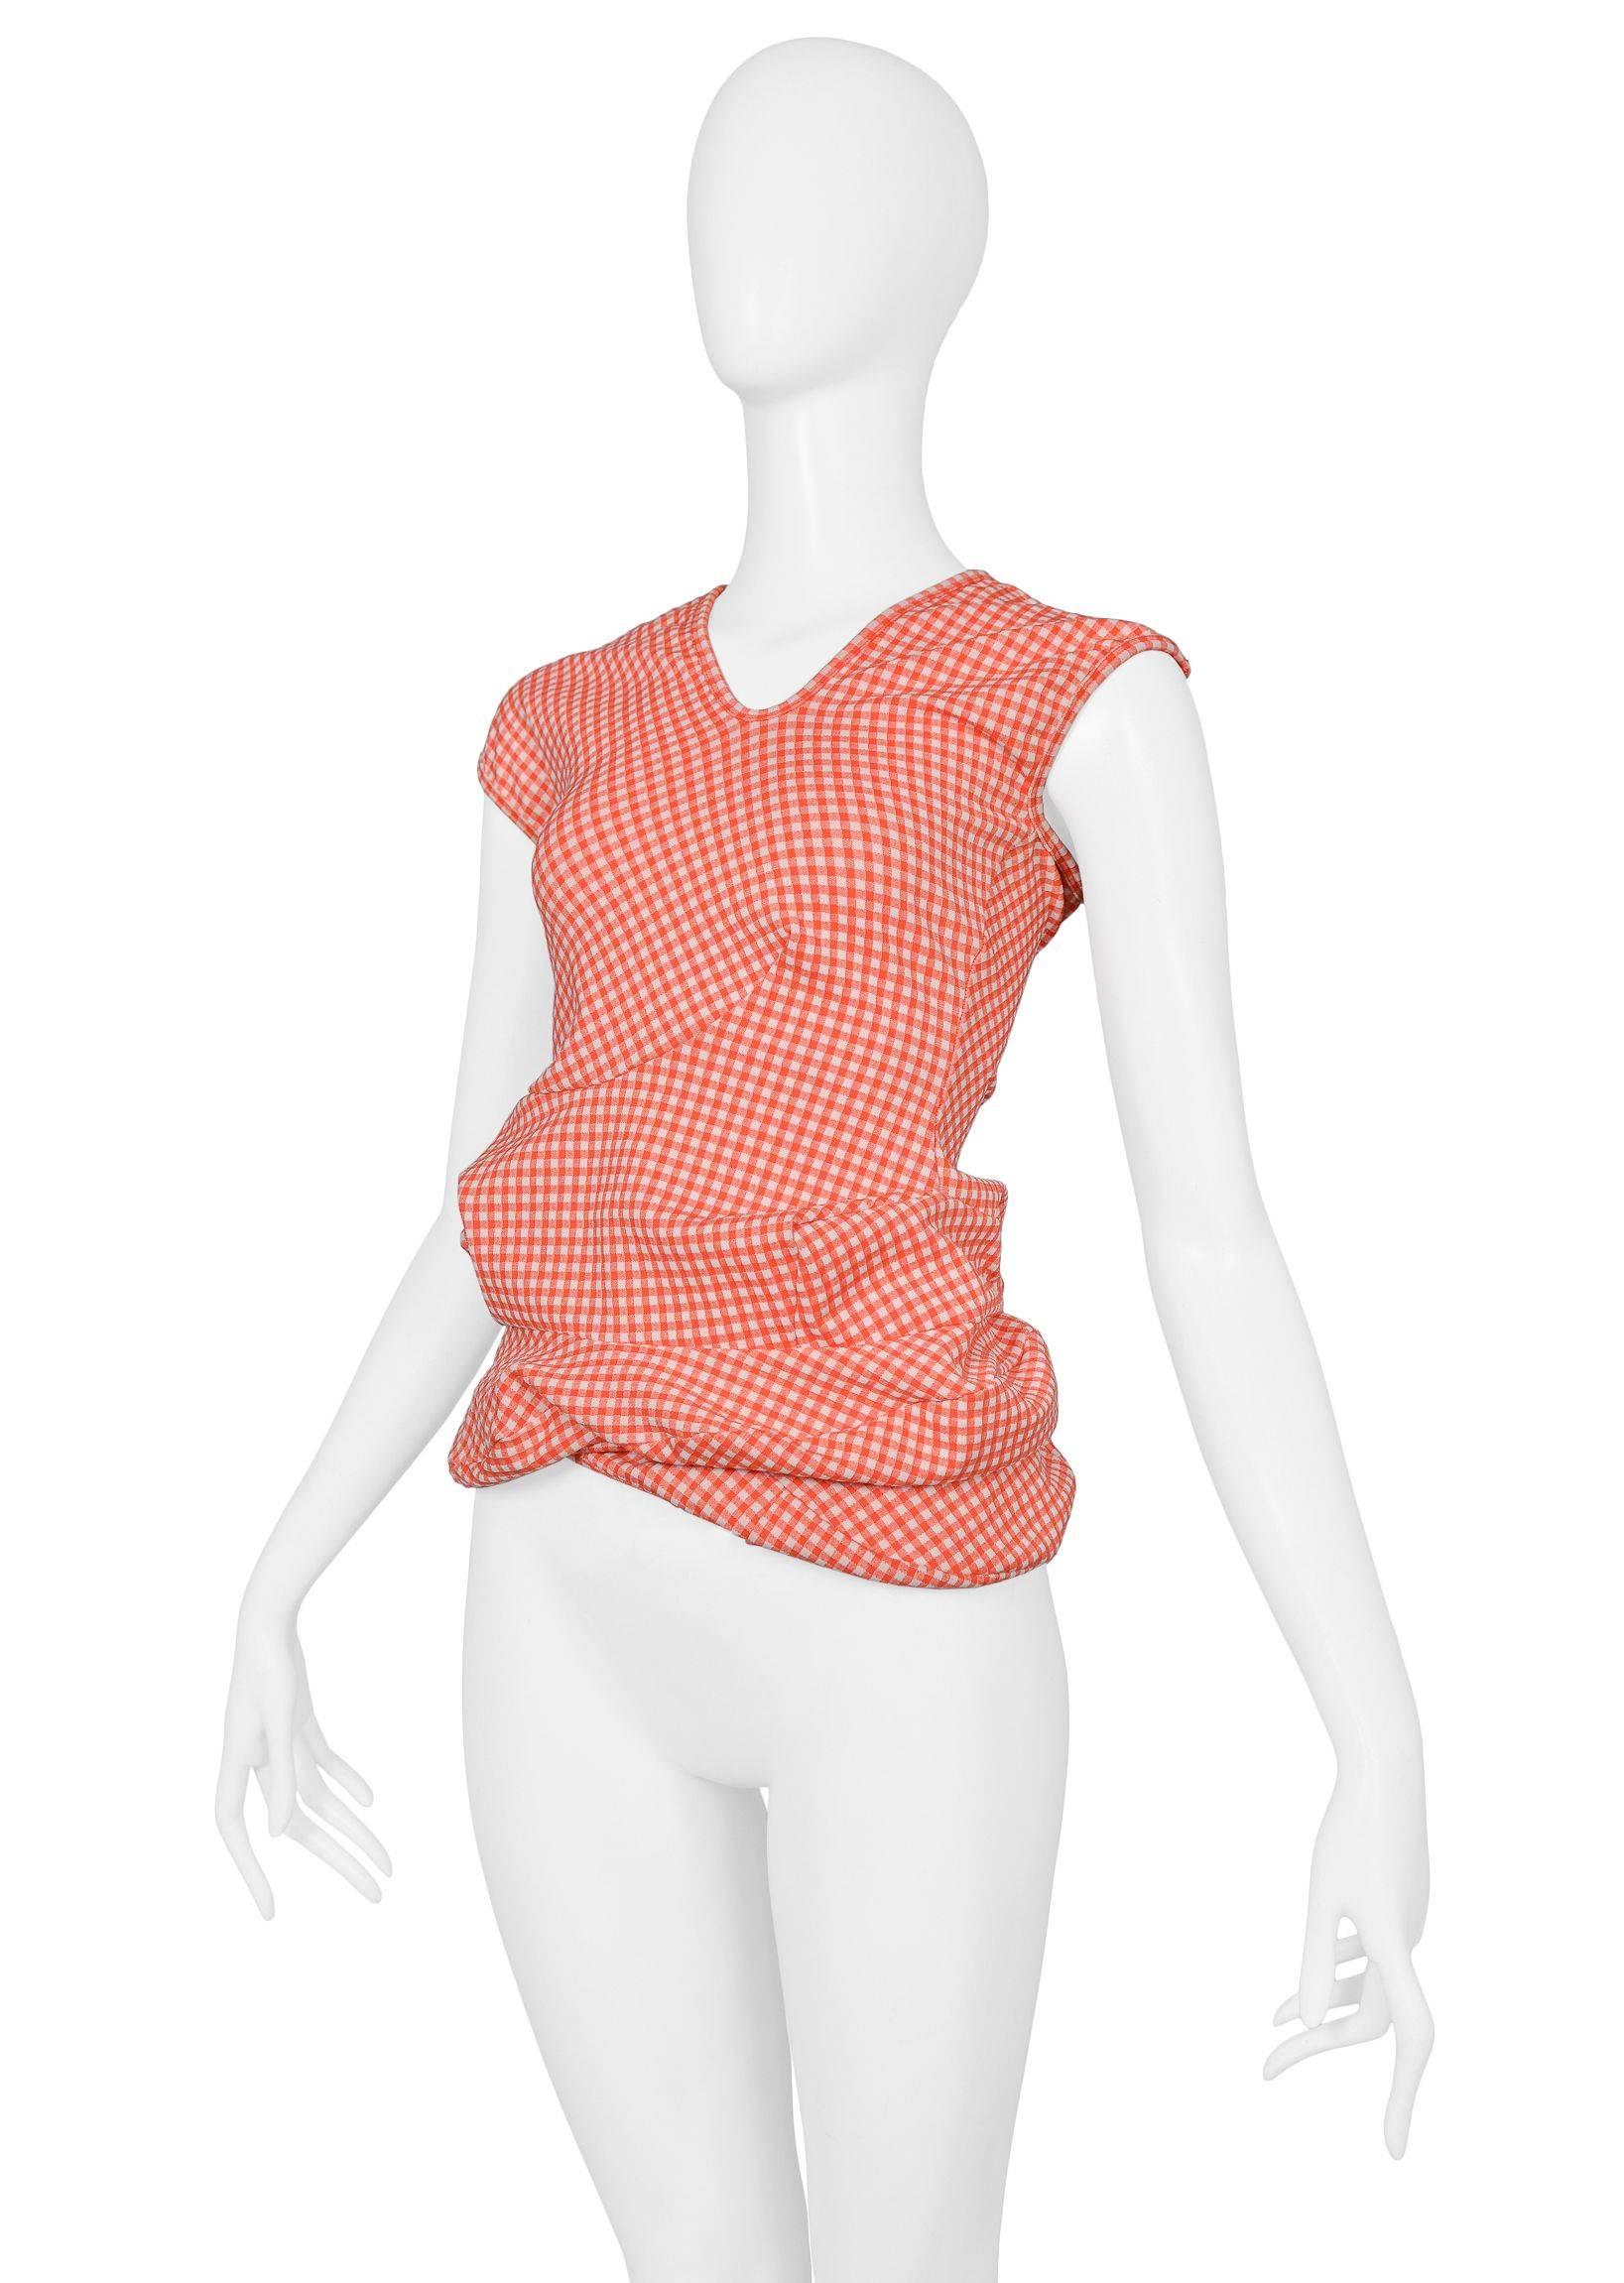 Women's Museum Quality Comme des Garcons Lumps & Bumps SS 1997 Red Gingham Top For Sale